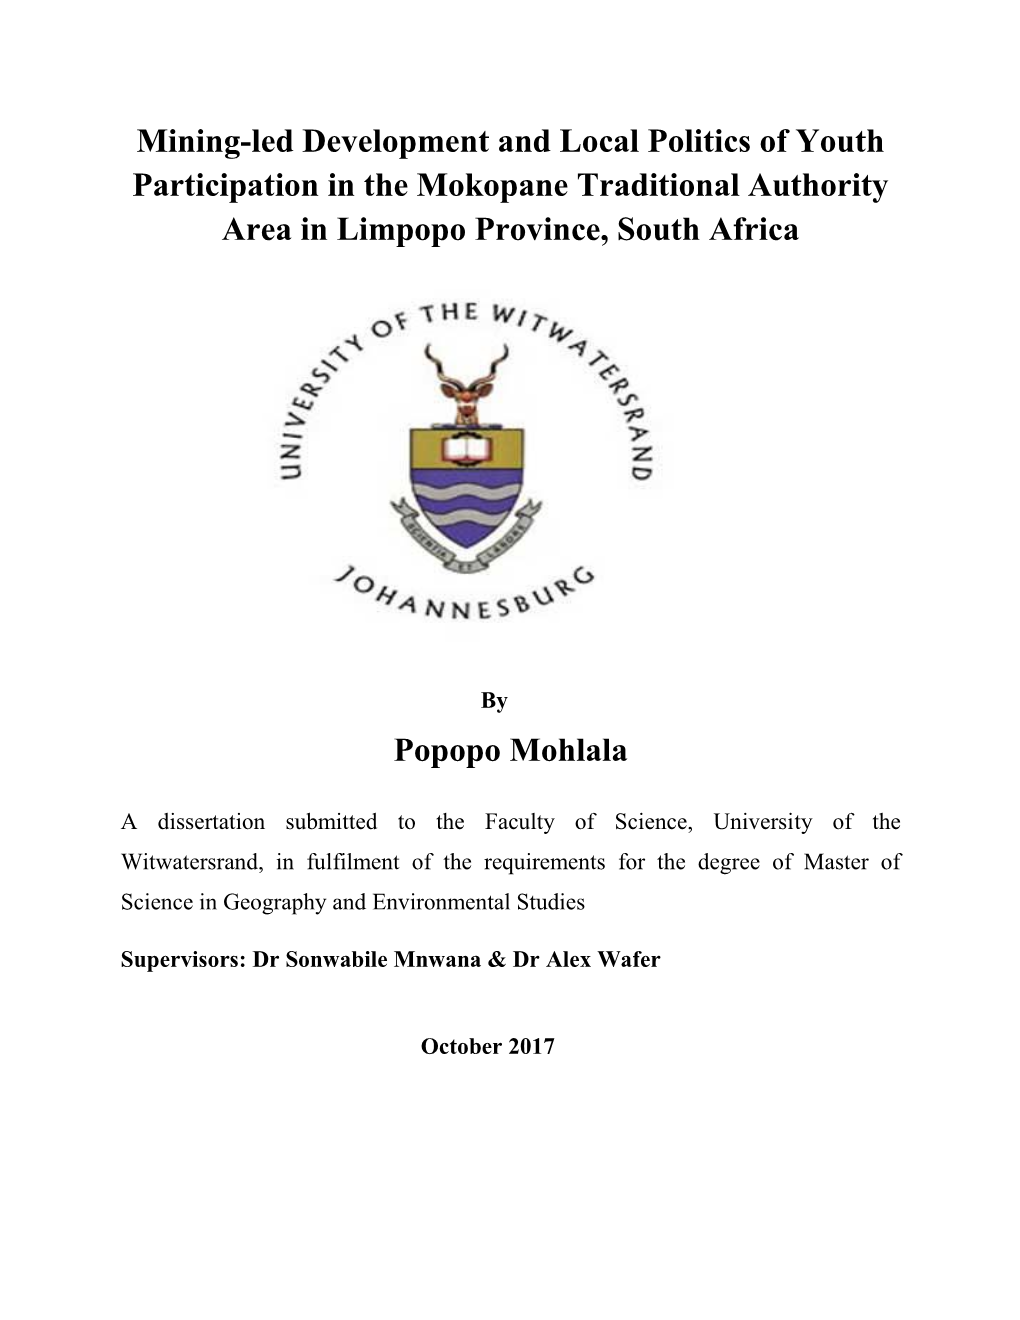 Mining-Led Development and Local Politics of Youth Participation in the Mokopane Traditional Authority Area in Limpopo Province, South Africa